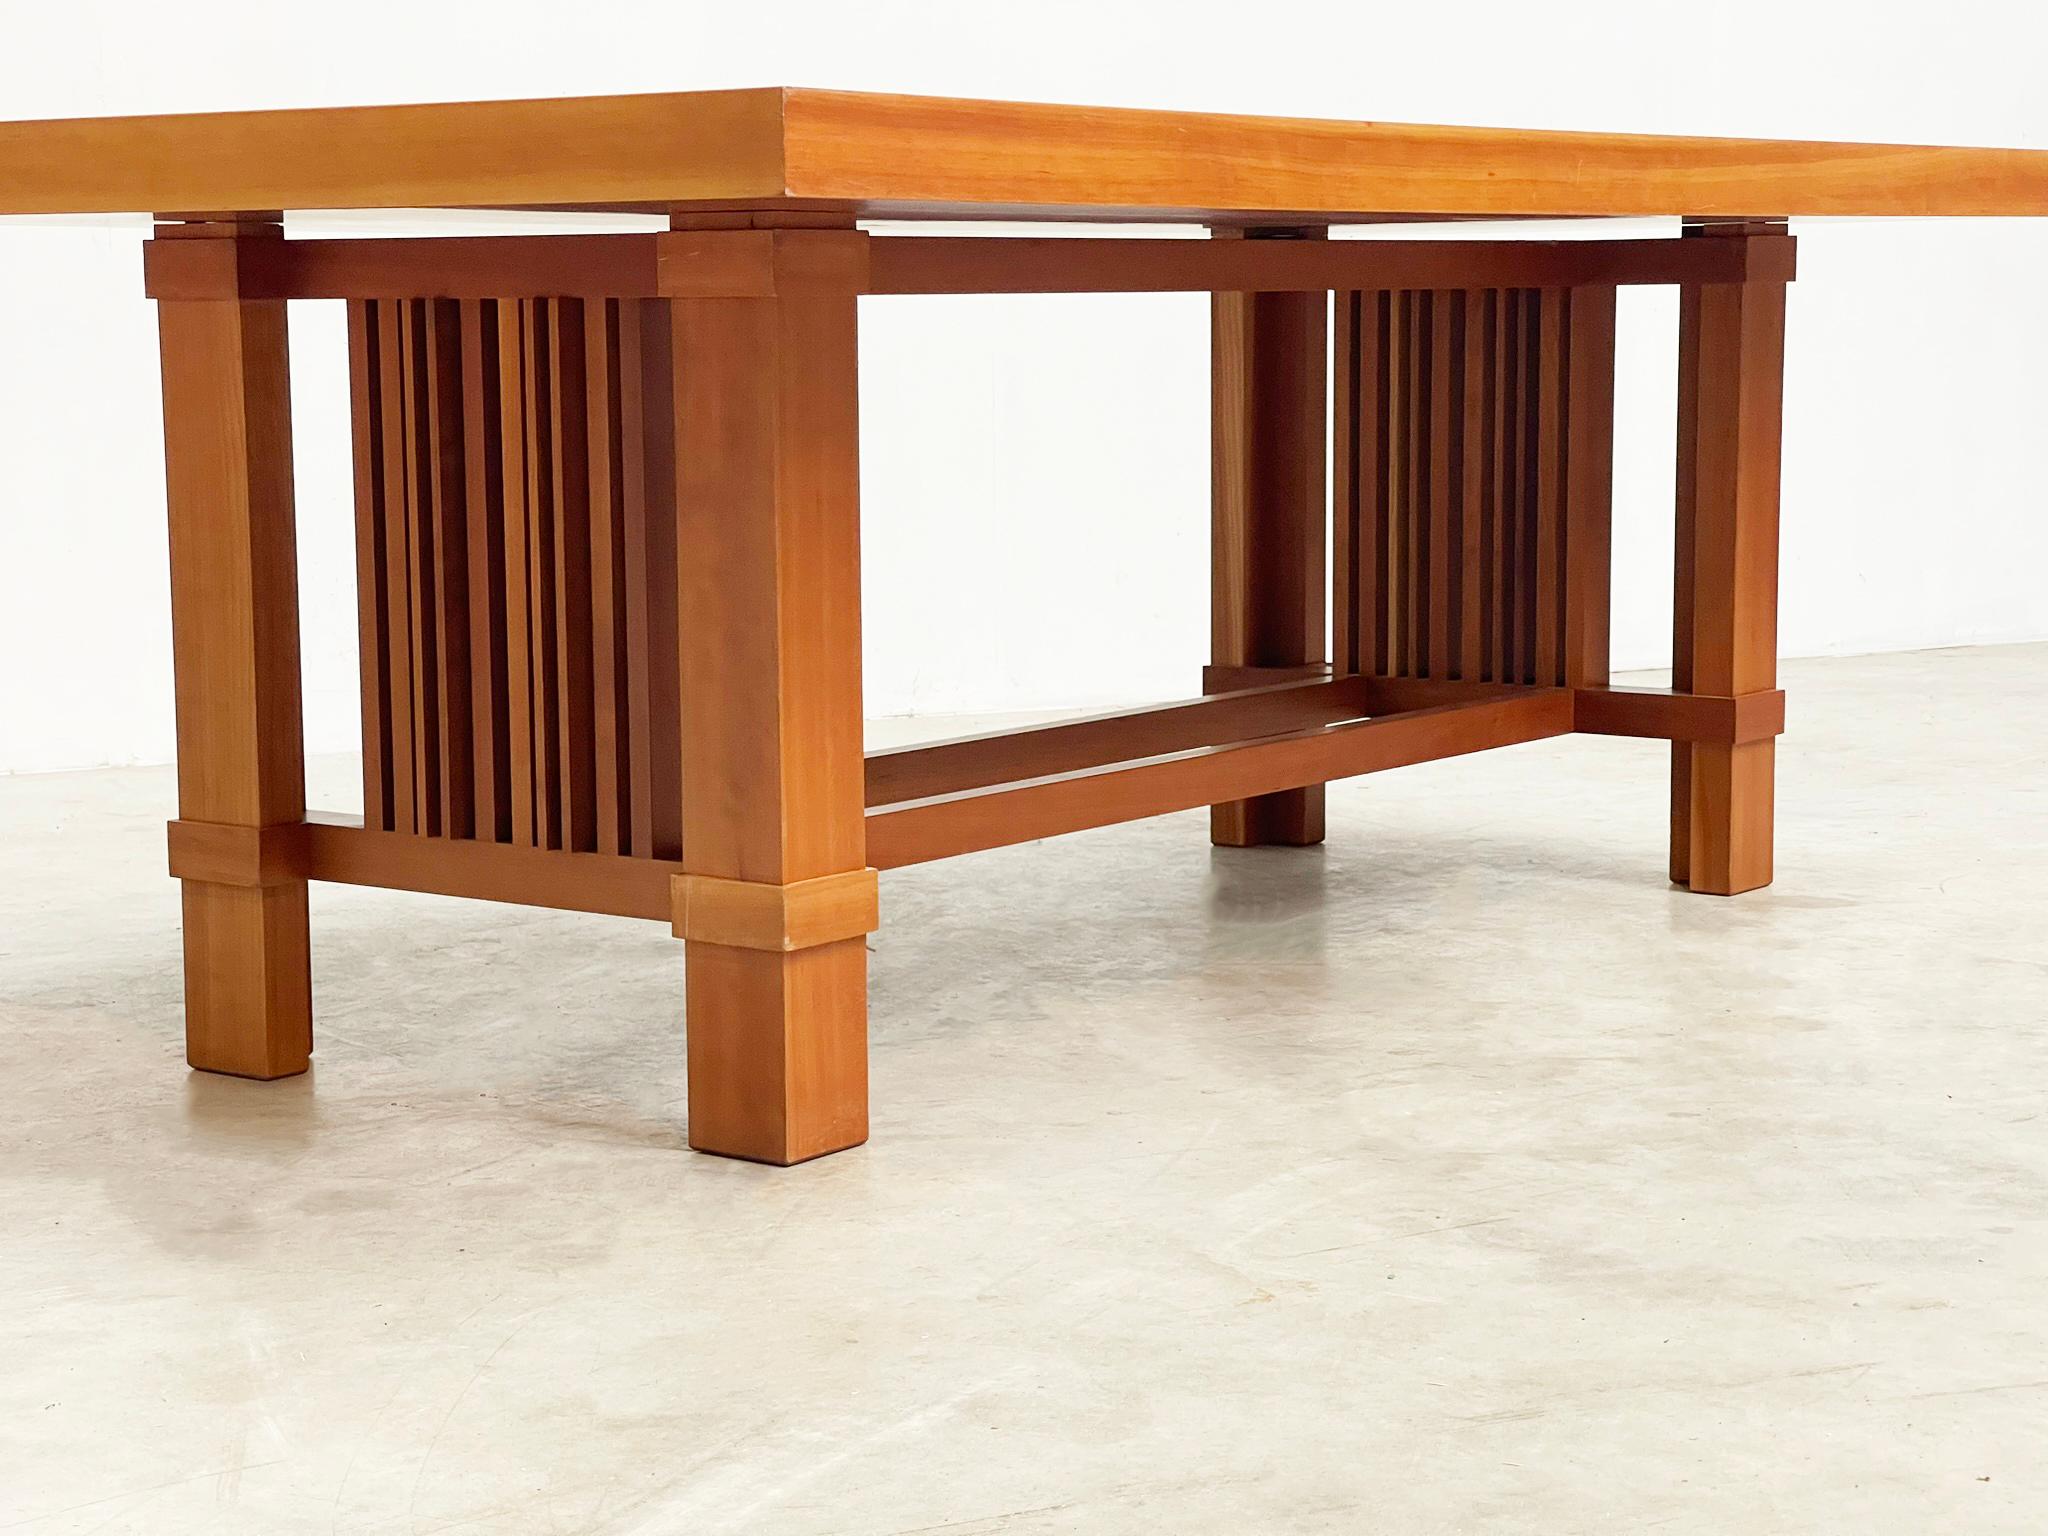 Frank Lloyd Wright “608 Taliesin” Dining Table signed by Cassina, 1986 For Sale 6